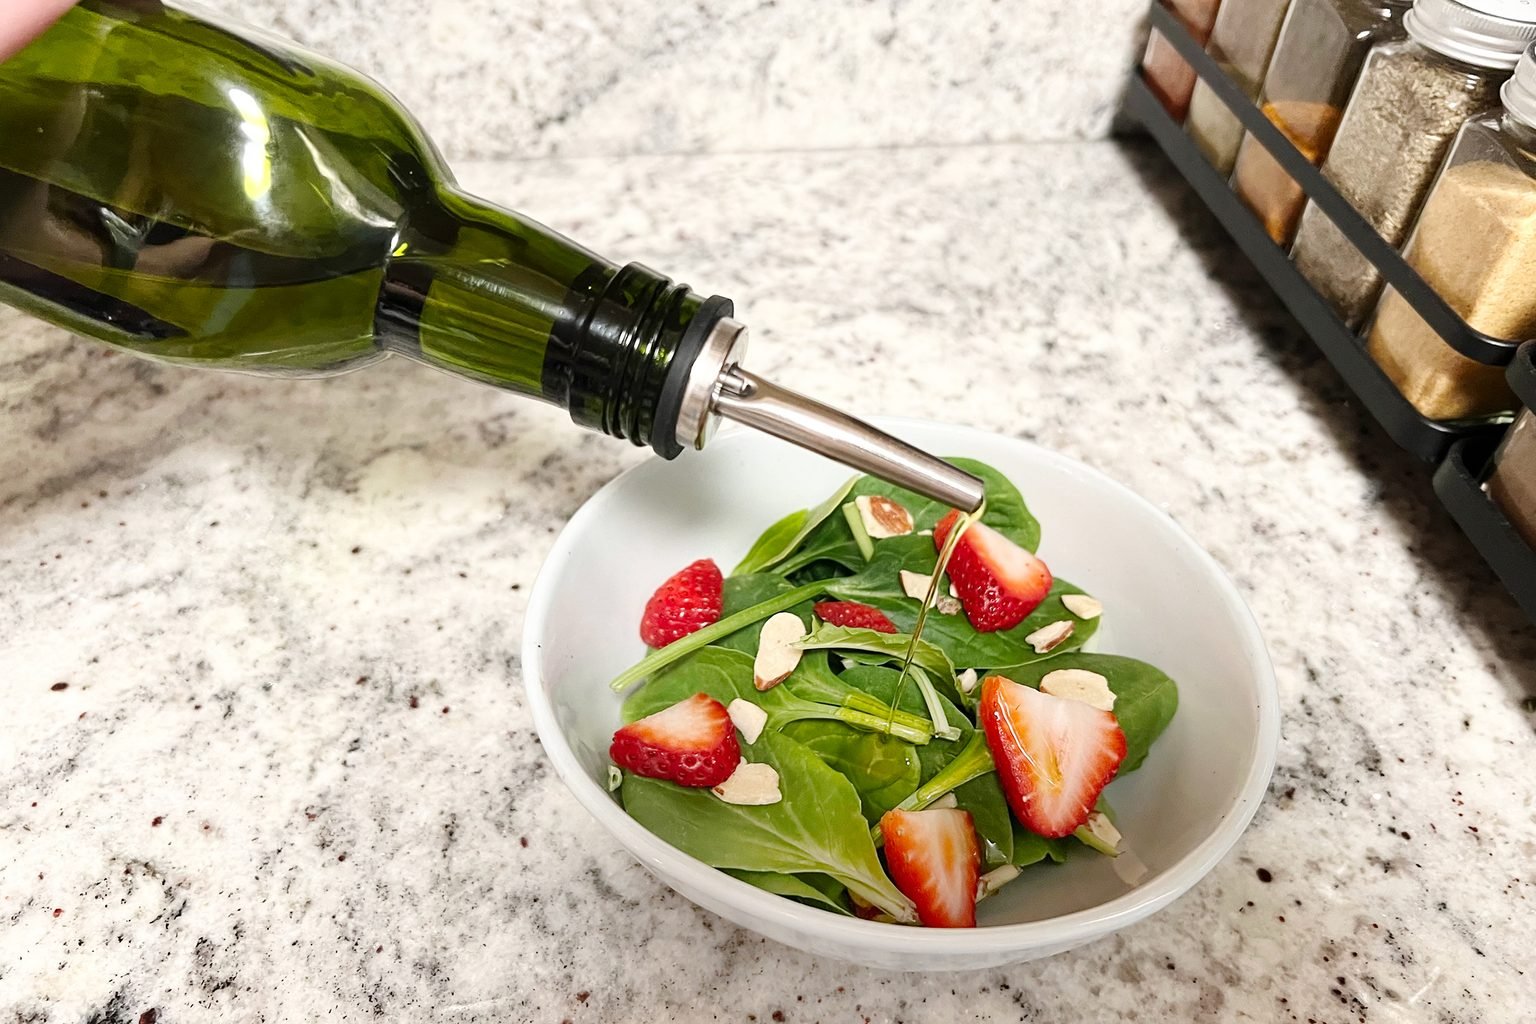 The Best Olive Oil Dispenser Bottle According To 16000 Amazon Reviews 